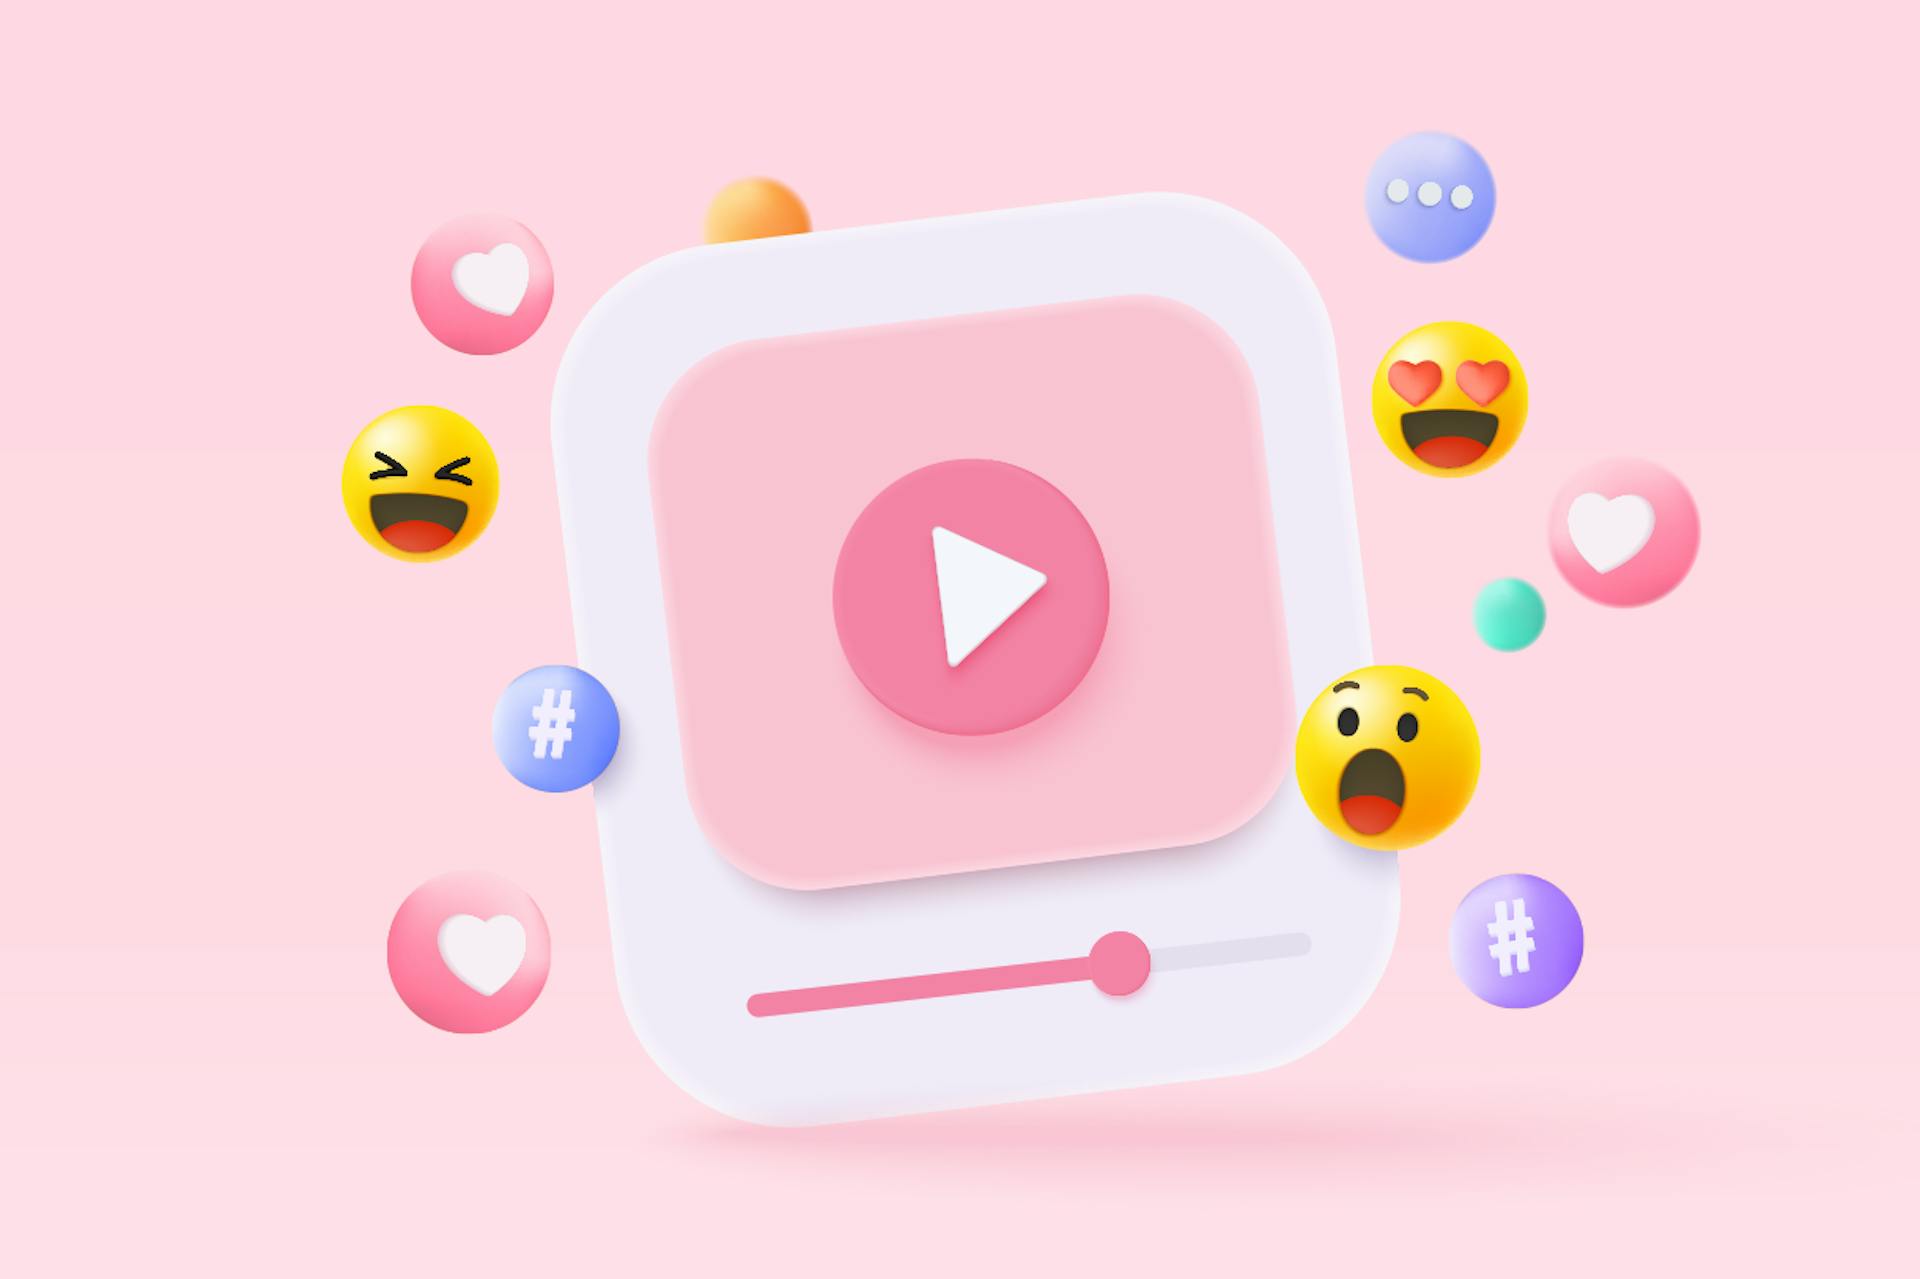 Large pink video play button surrounded by different emoji expressions, like and hashtag symbols. Best social media marketing campaigns blog post